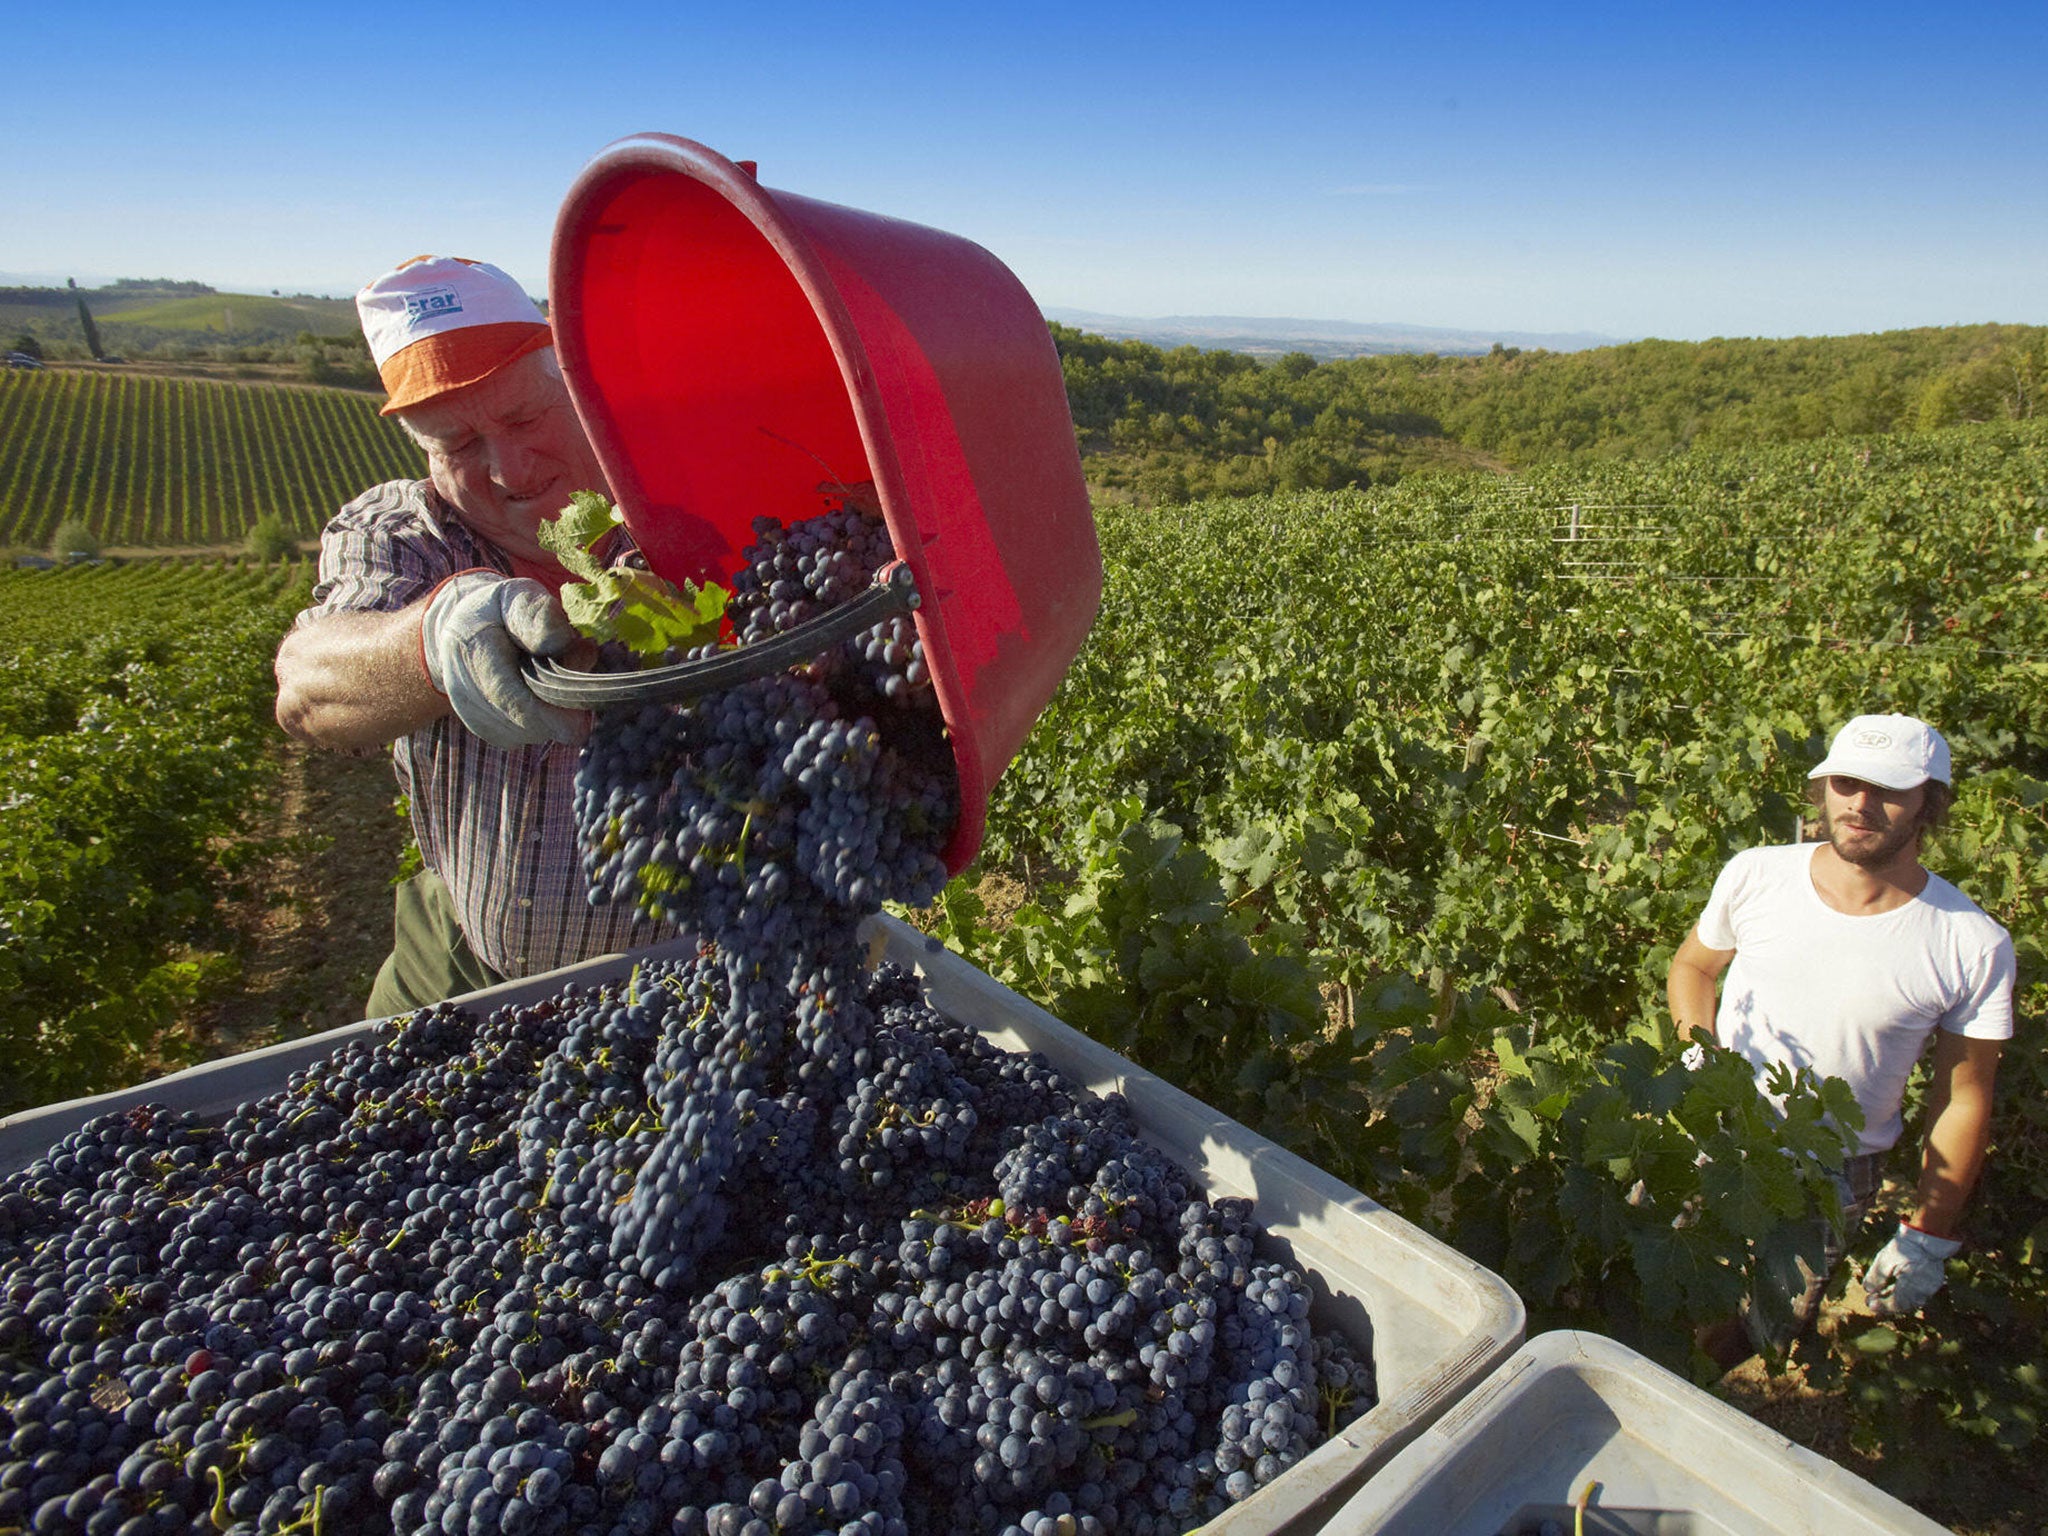 Small winemakers say the restriction makes it hard to sell overseas